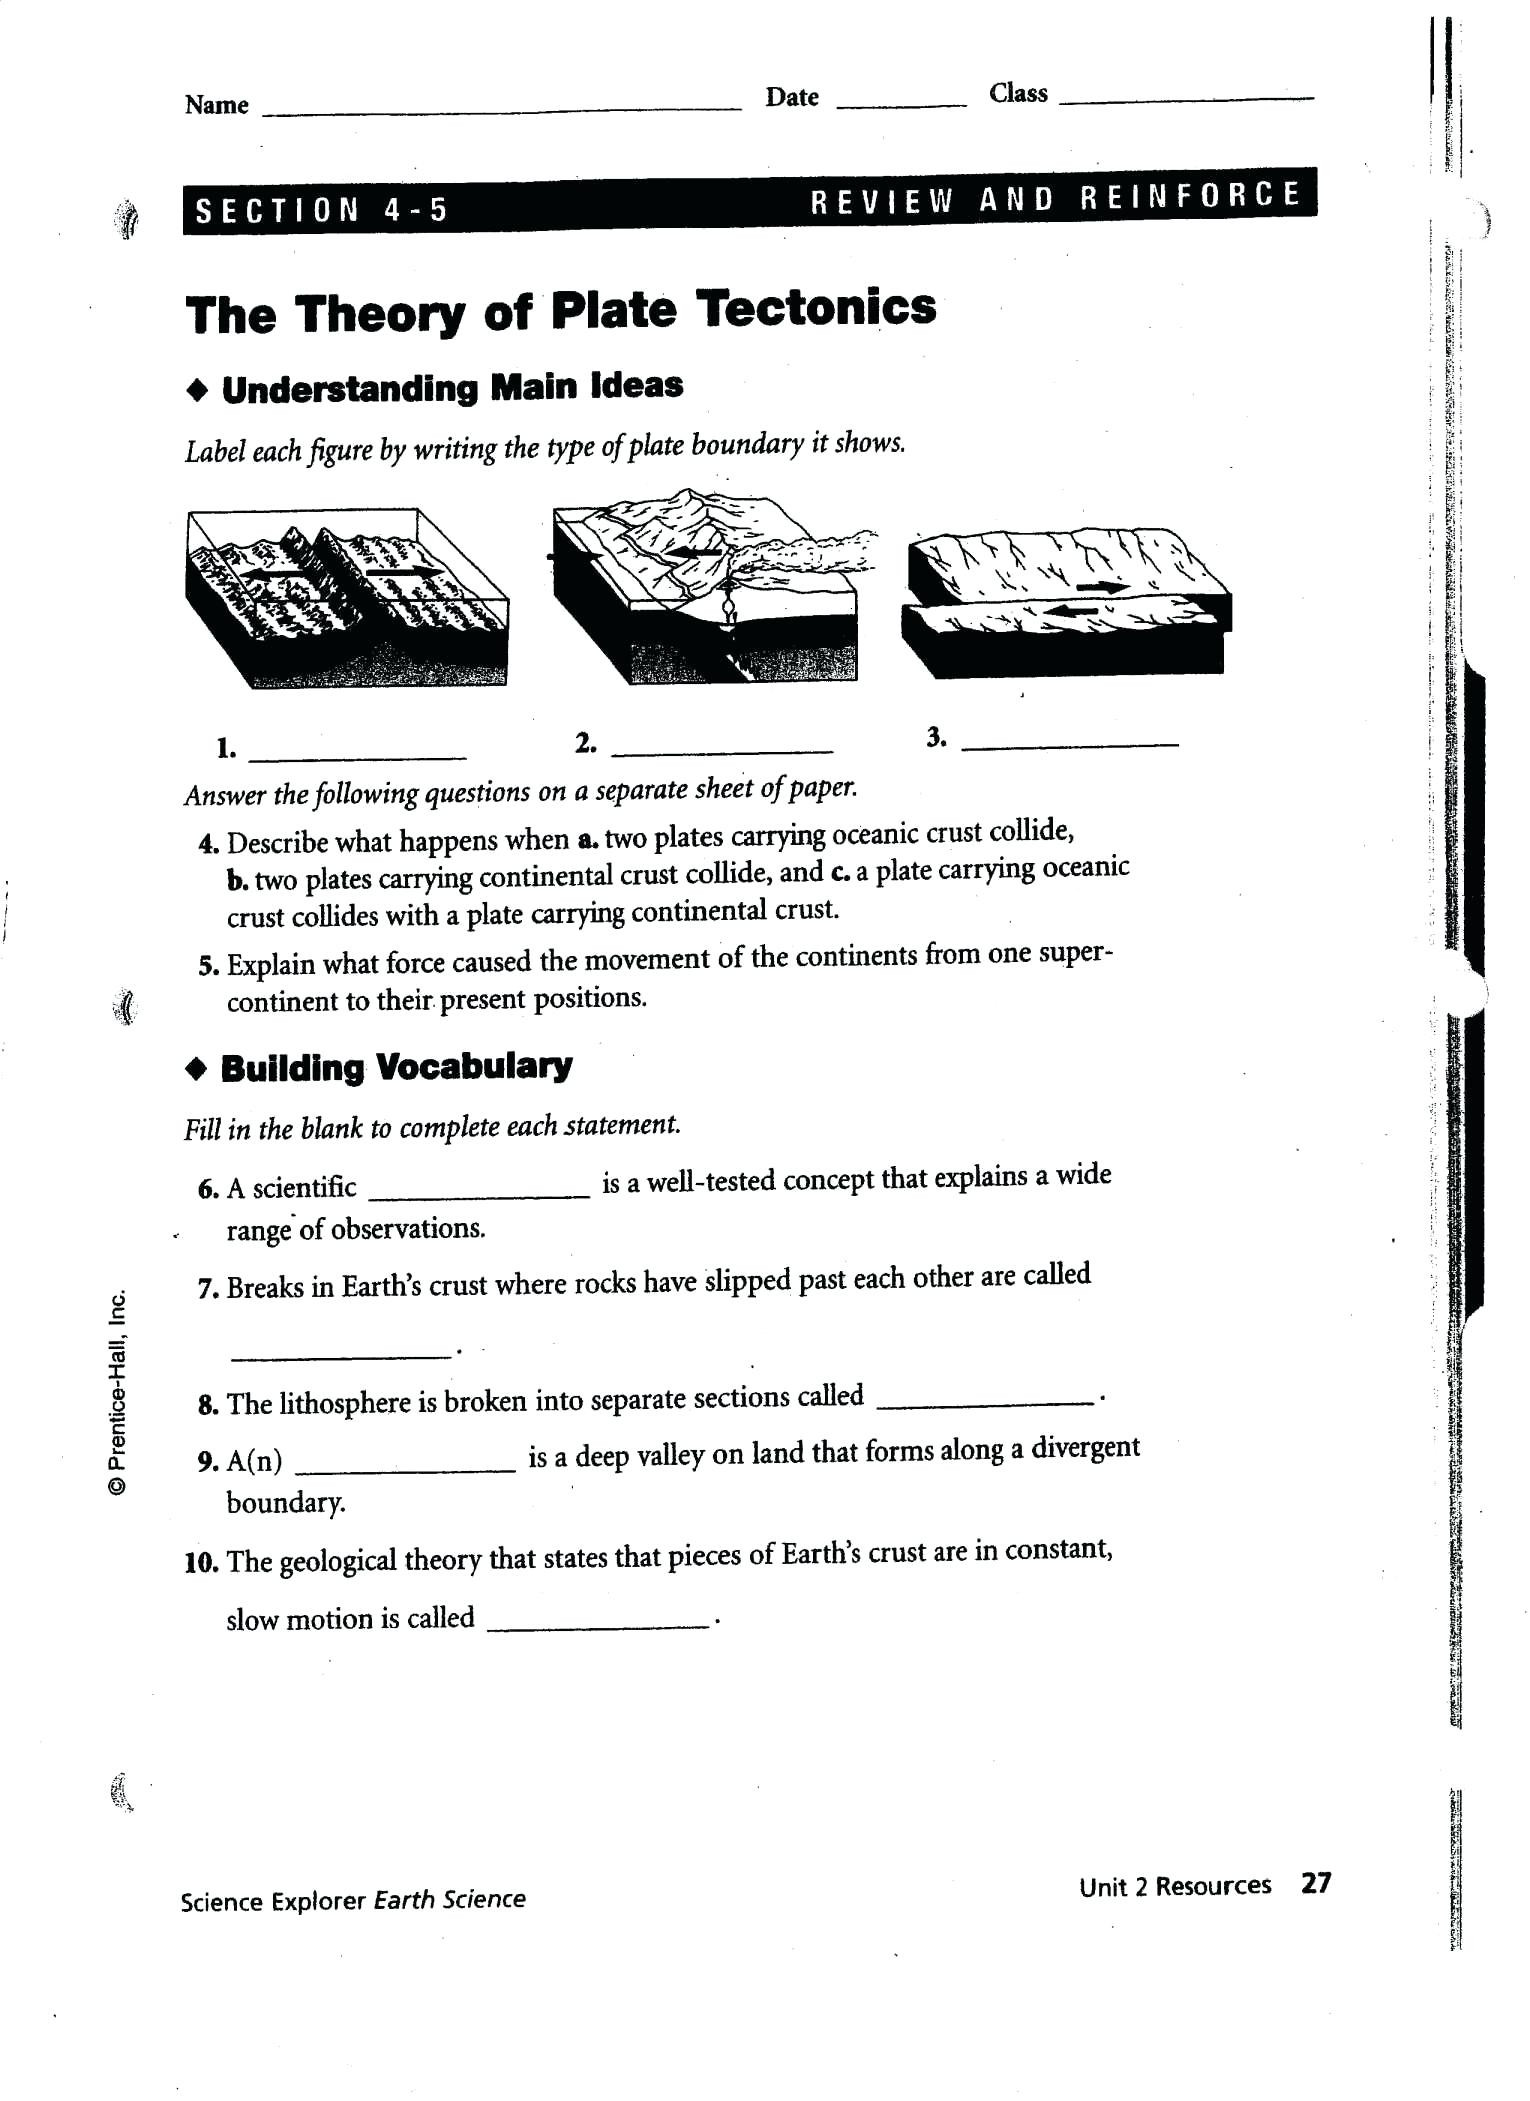 Plate Tectonic Worksheet Answers Plate Tectonics Worksheets for Middle School Awesome the